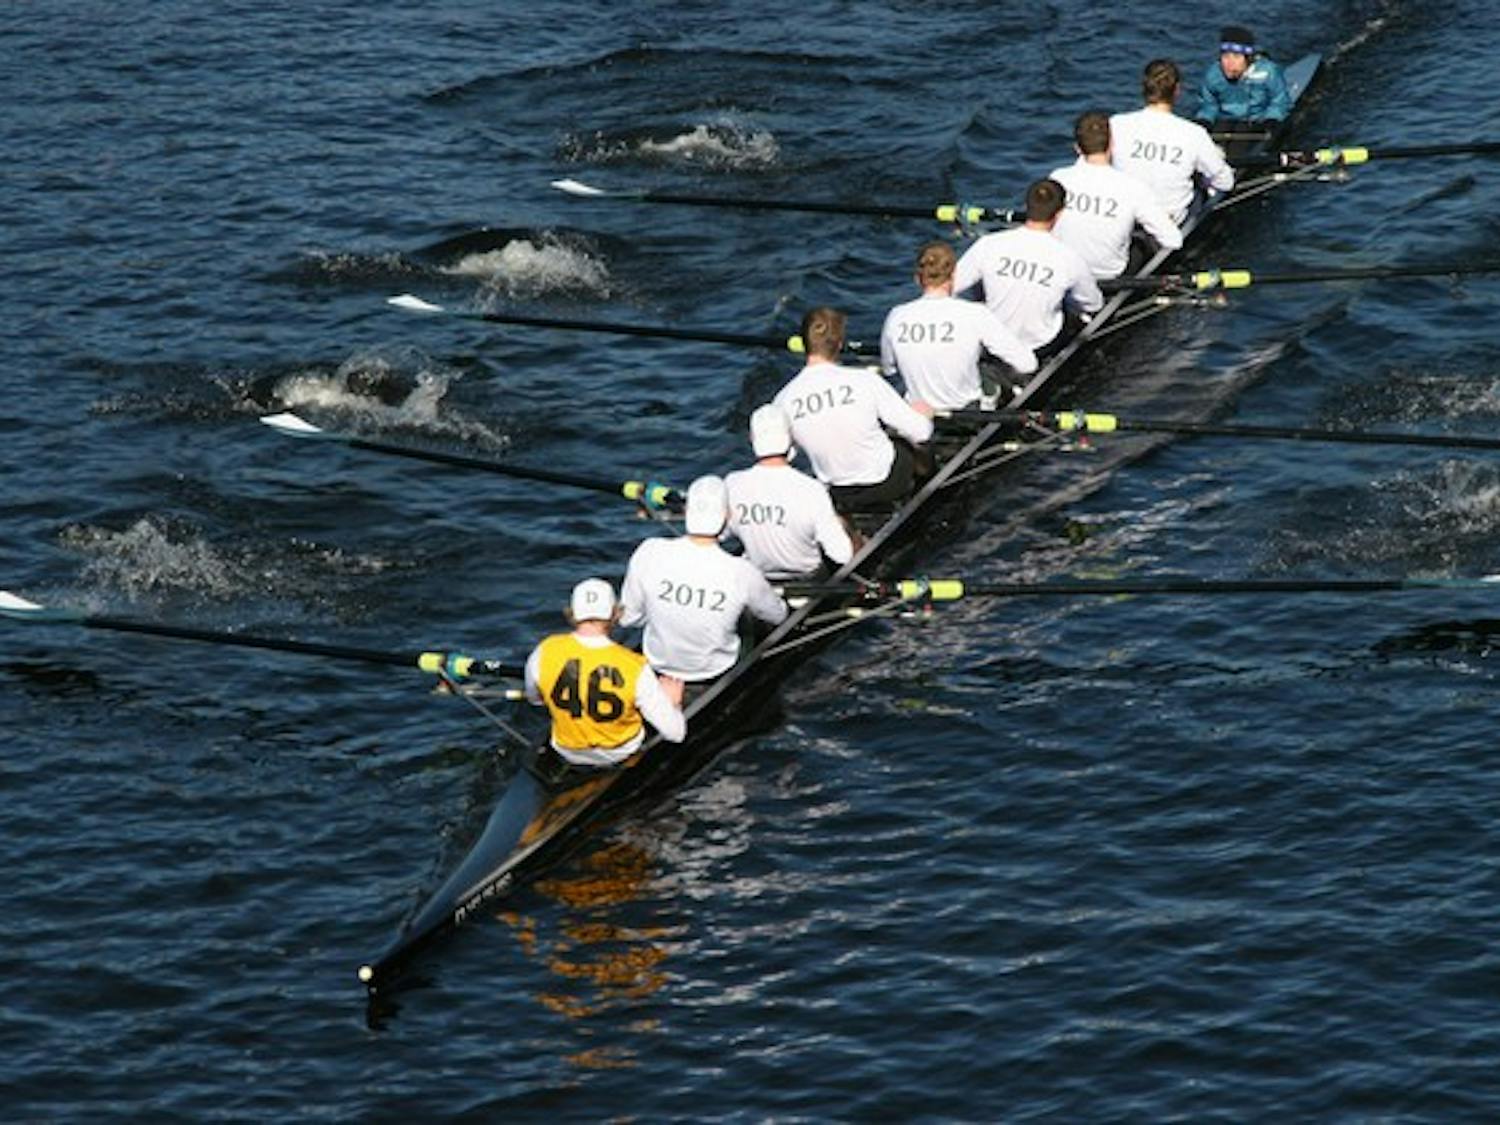 Knapp asserts that watching a Dartmouth crew race is something every Big Green sports fan should experience.